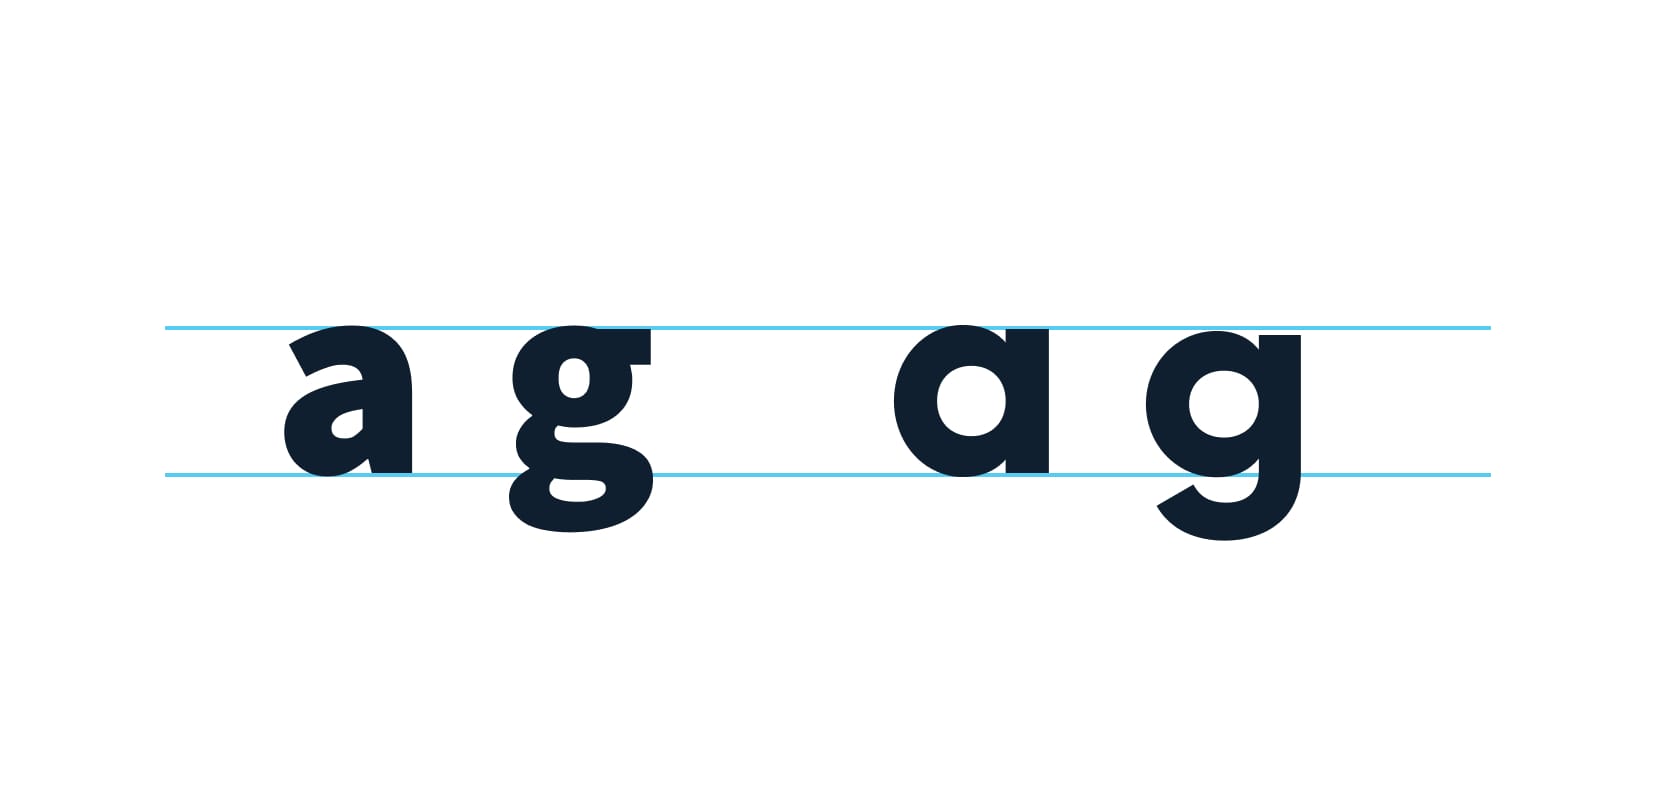 Double-storey “a” and “g” on the left, single-storey “a” and “g” on the right